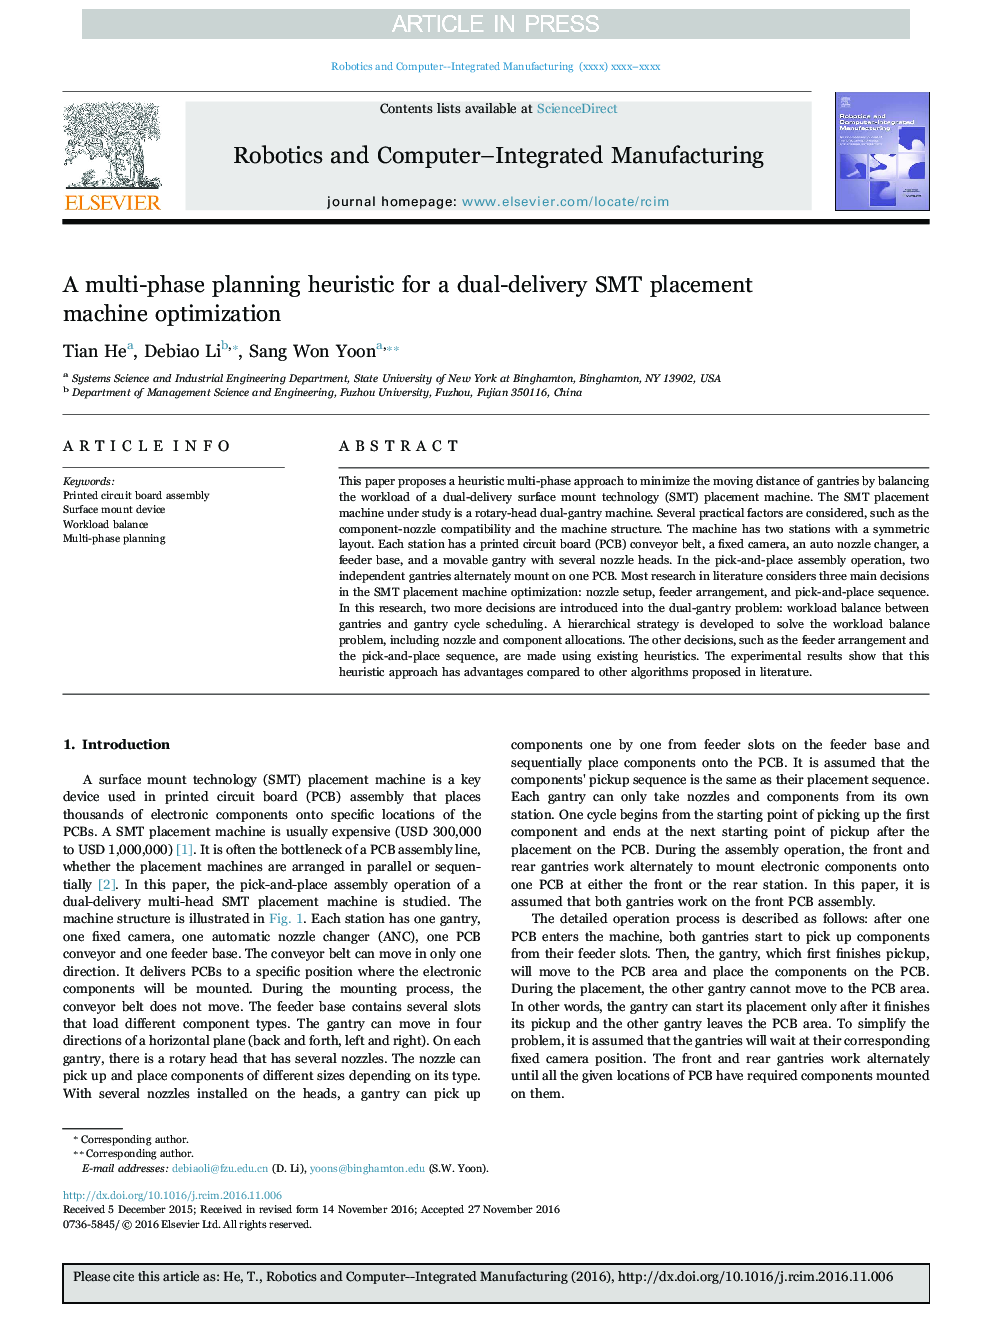 A multi-phase planning heuristic for a dual-delivery SMT placement machine optimization